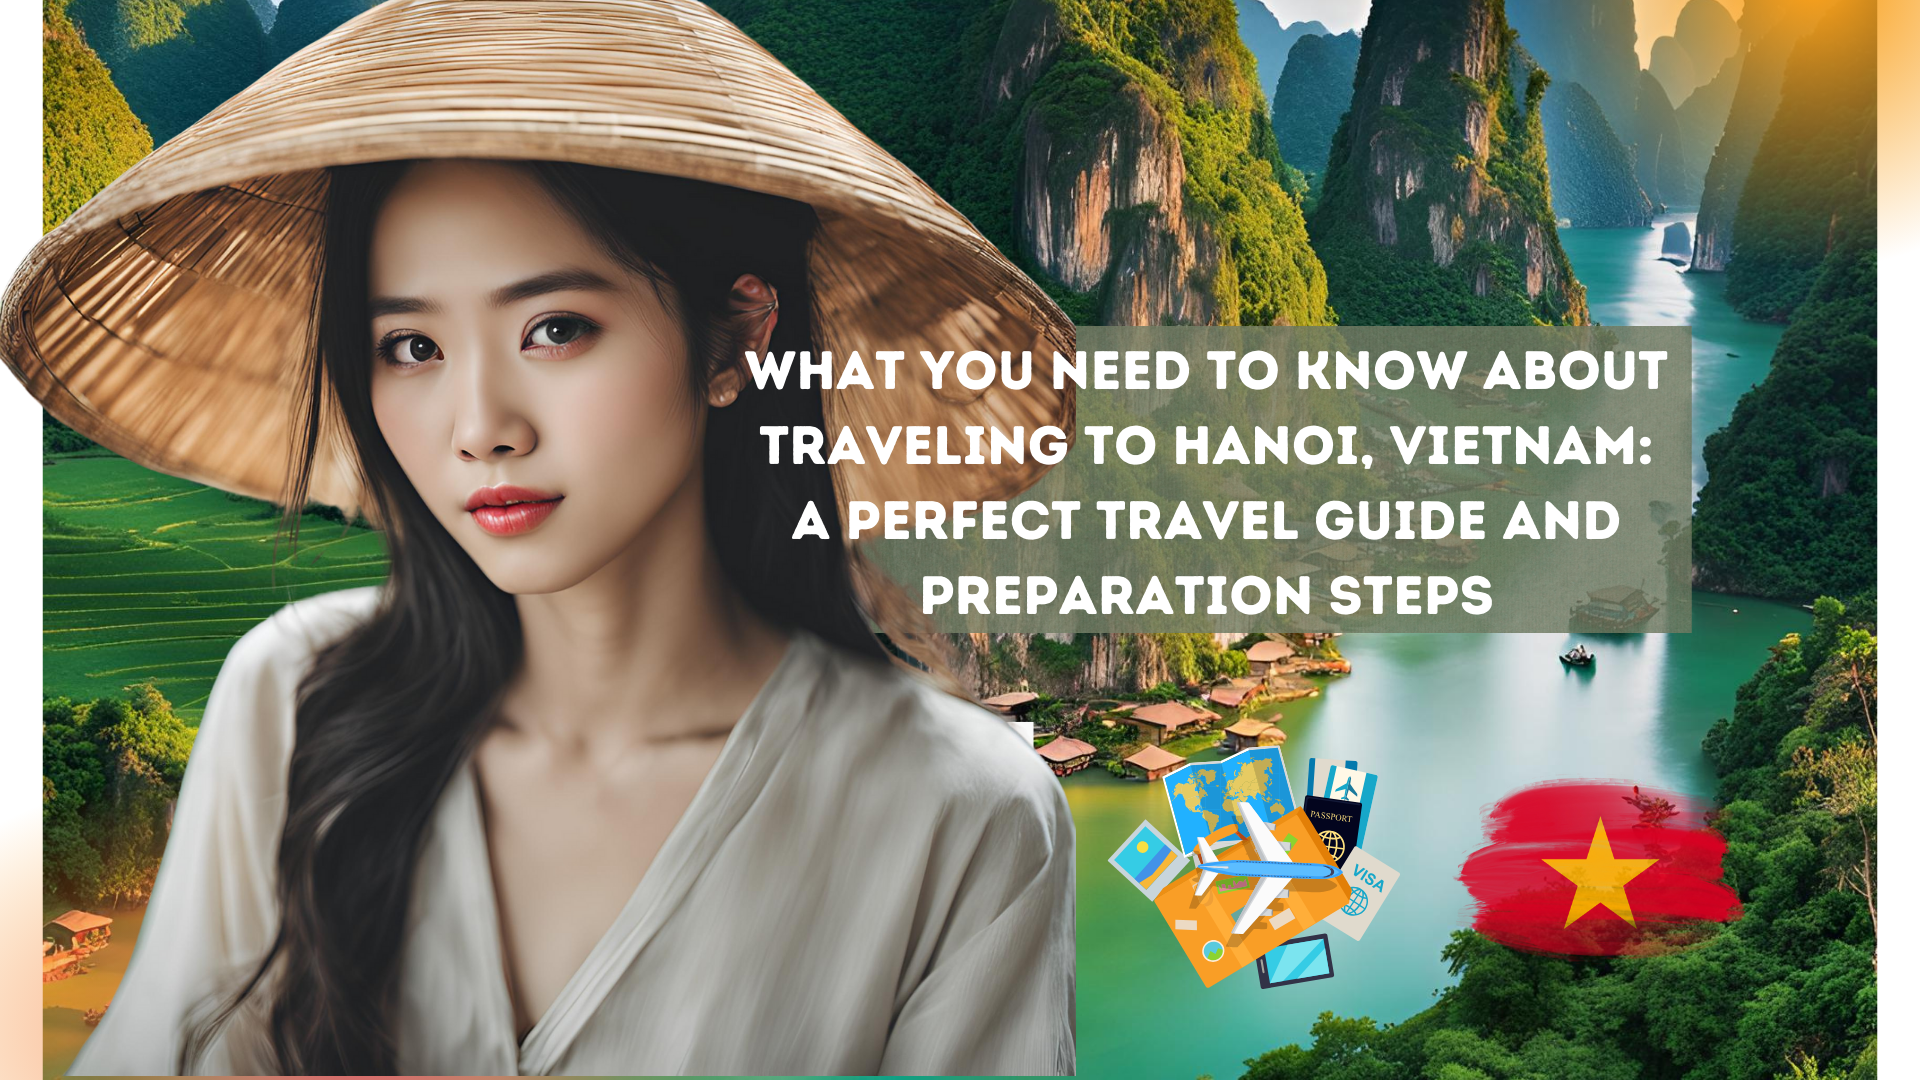 What you need to know about traveling to Hanoi, Vietnam: a perfect travel guide and preparation steps